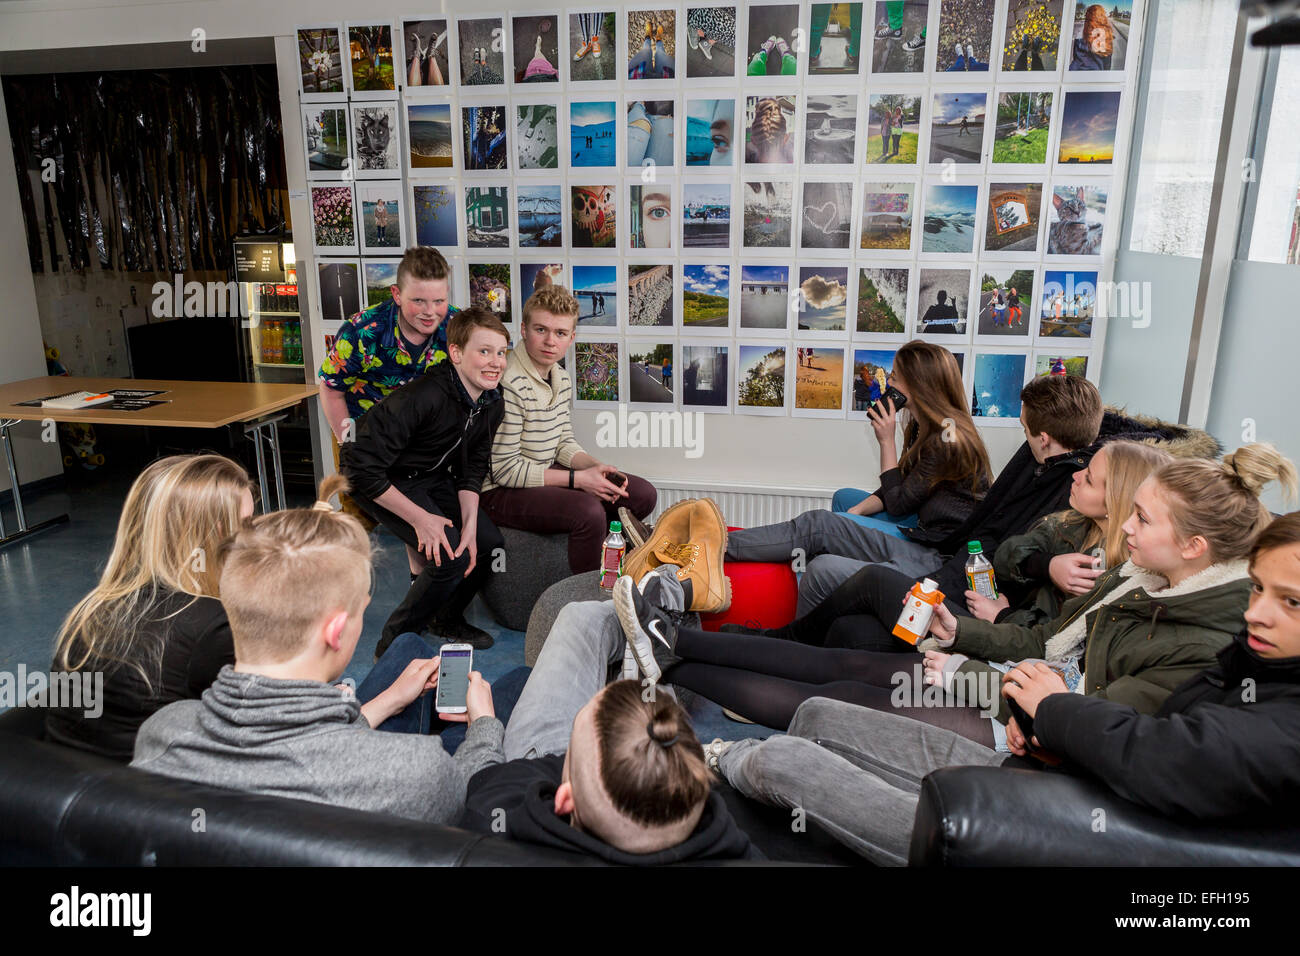 Group of teenagers sitting together at an art exhibition. Annual Children's Festival, Reykjavik, Iceland Stock Photo